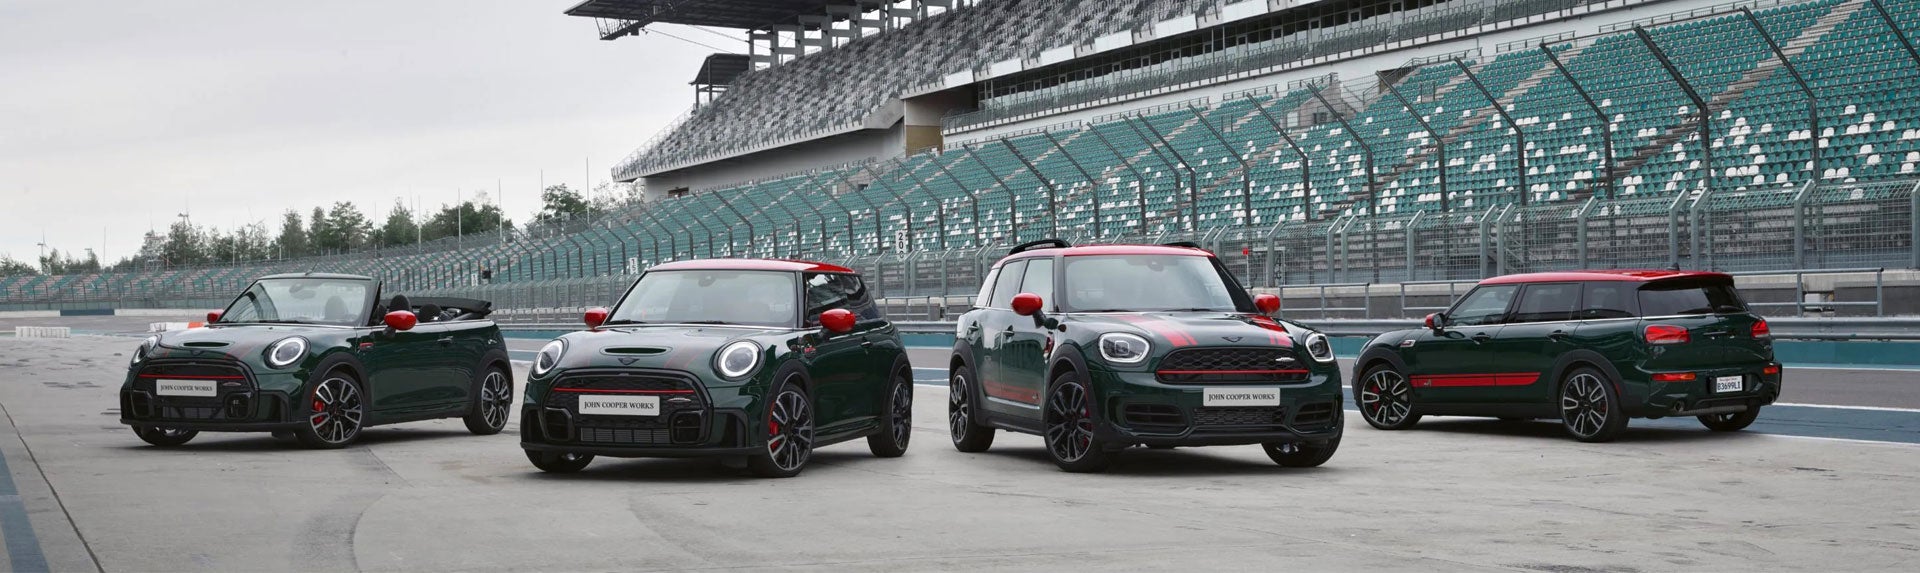 Family of four MINI John Cooper Works models parked on a race track. | MINIDemo1 in Derwood MD